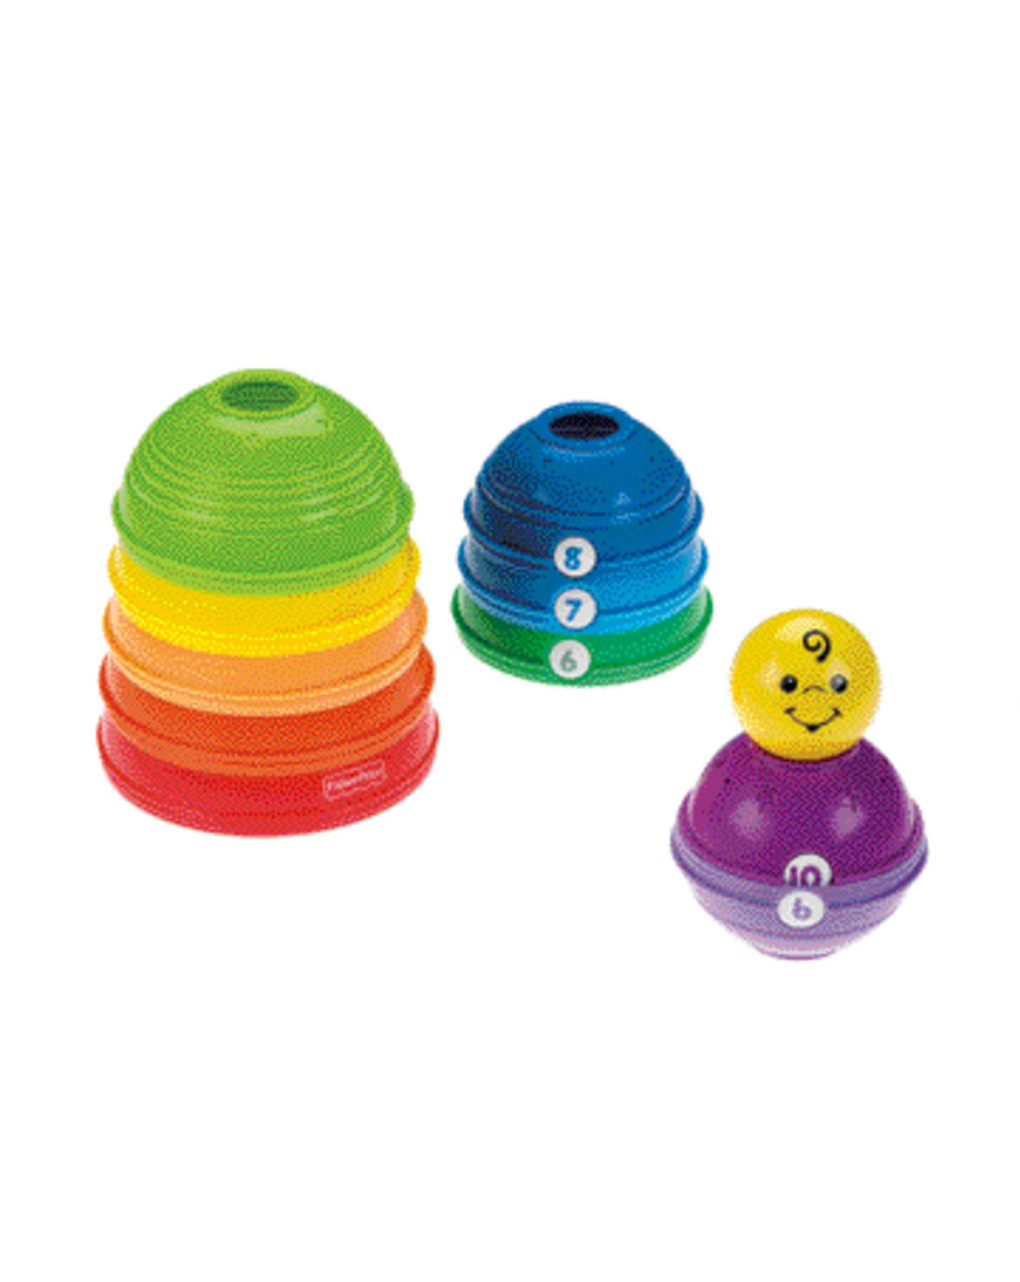 Cuencos transformables 6+ meses - fisher price - Fisher-Price